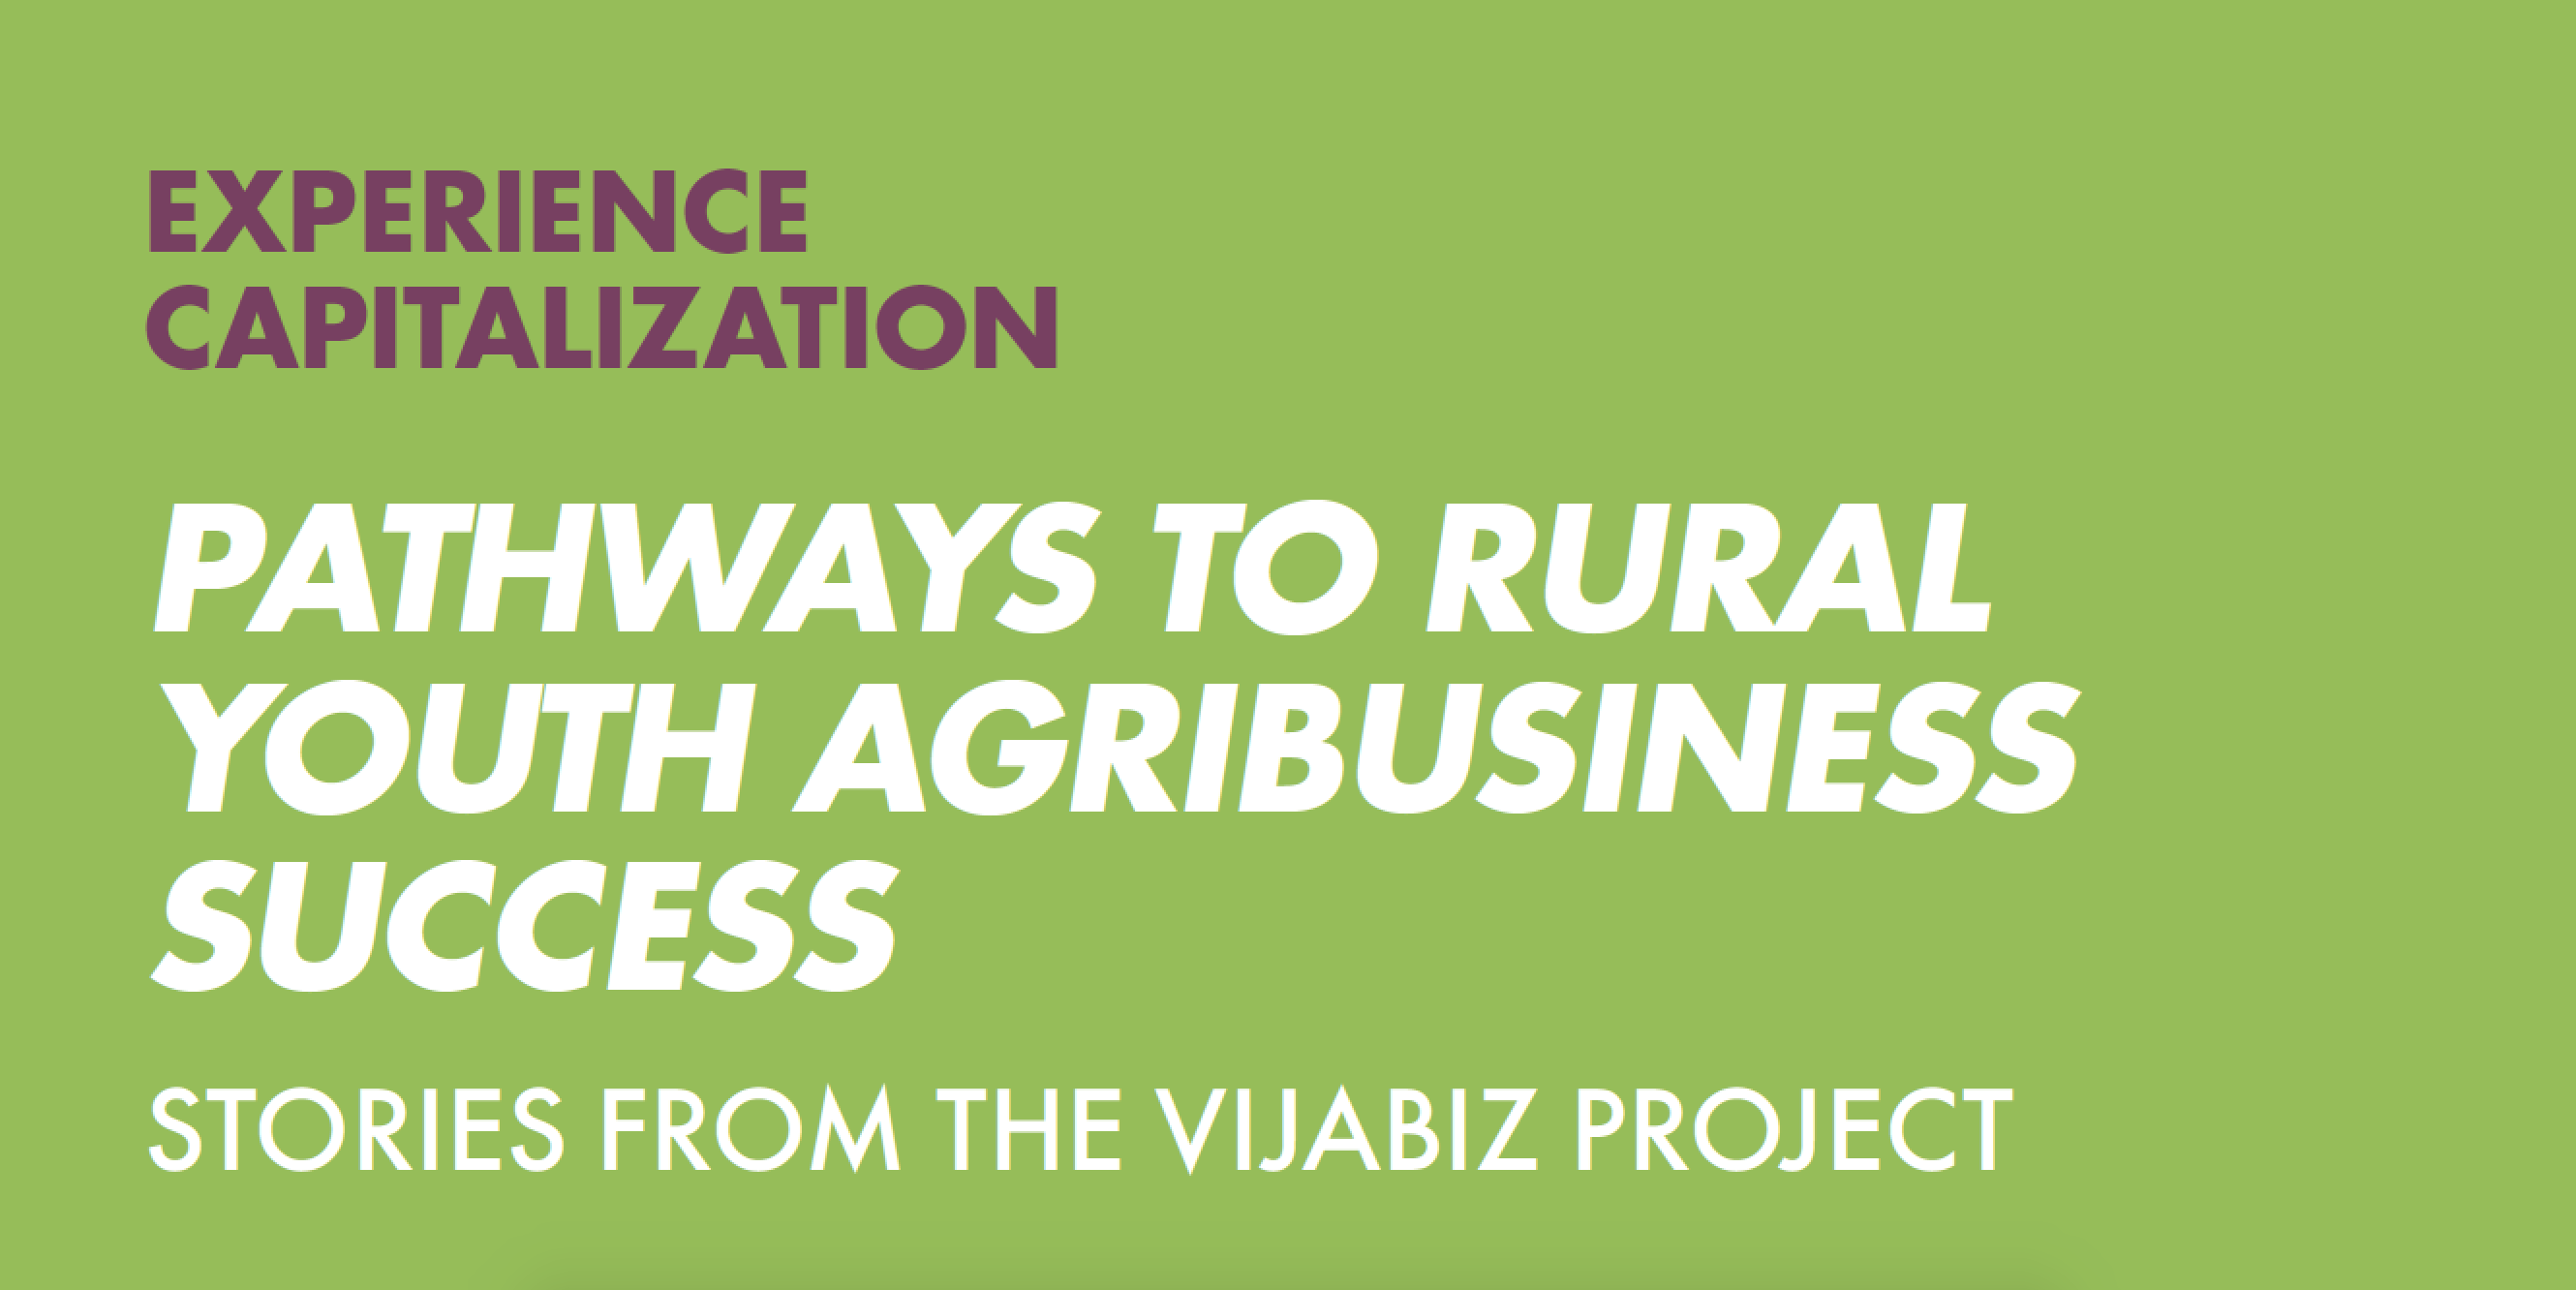 Rural Youth Agribusiness Development Through Business Mentorship